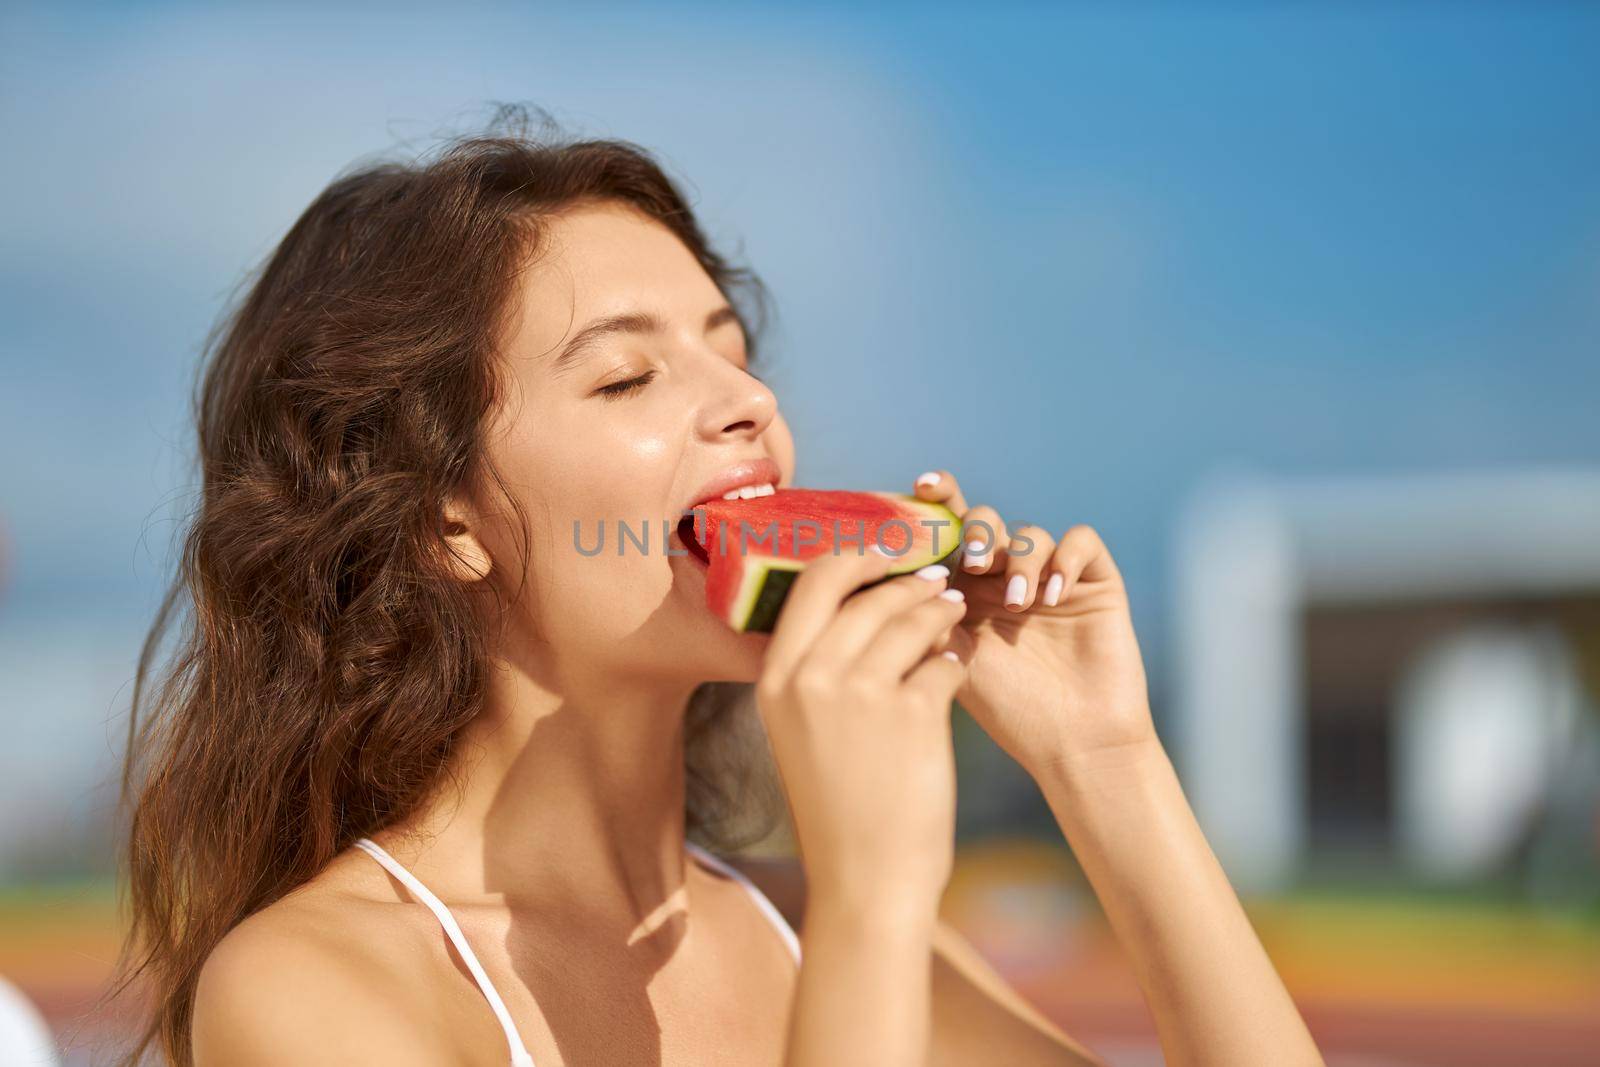 Young brunette woman biting juicy slice of watermelon outdoor. Portrait view of charming caucasian girl eating ripe watermelon, closing eyes in pleasure, with copy space. Concept of satisfaction.